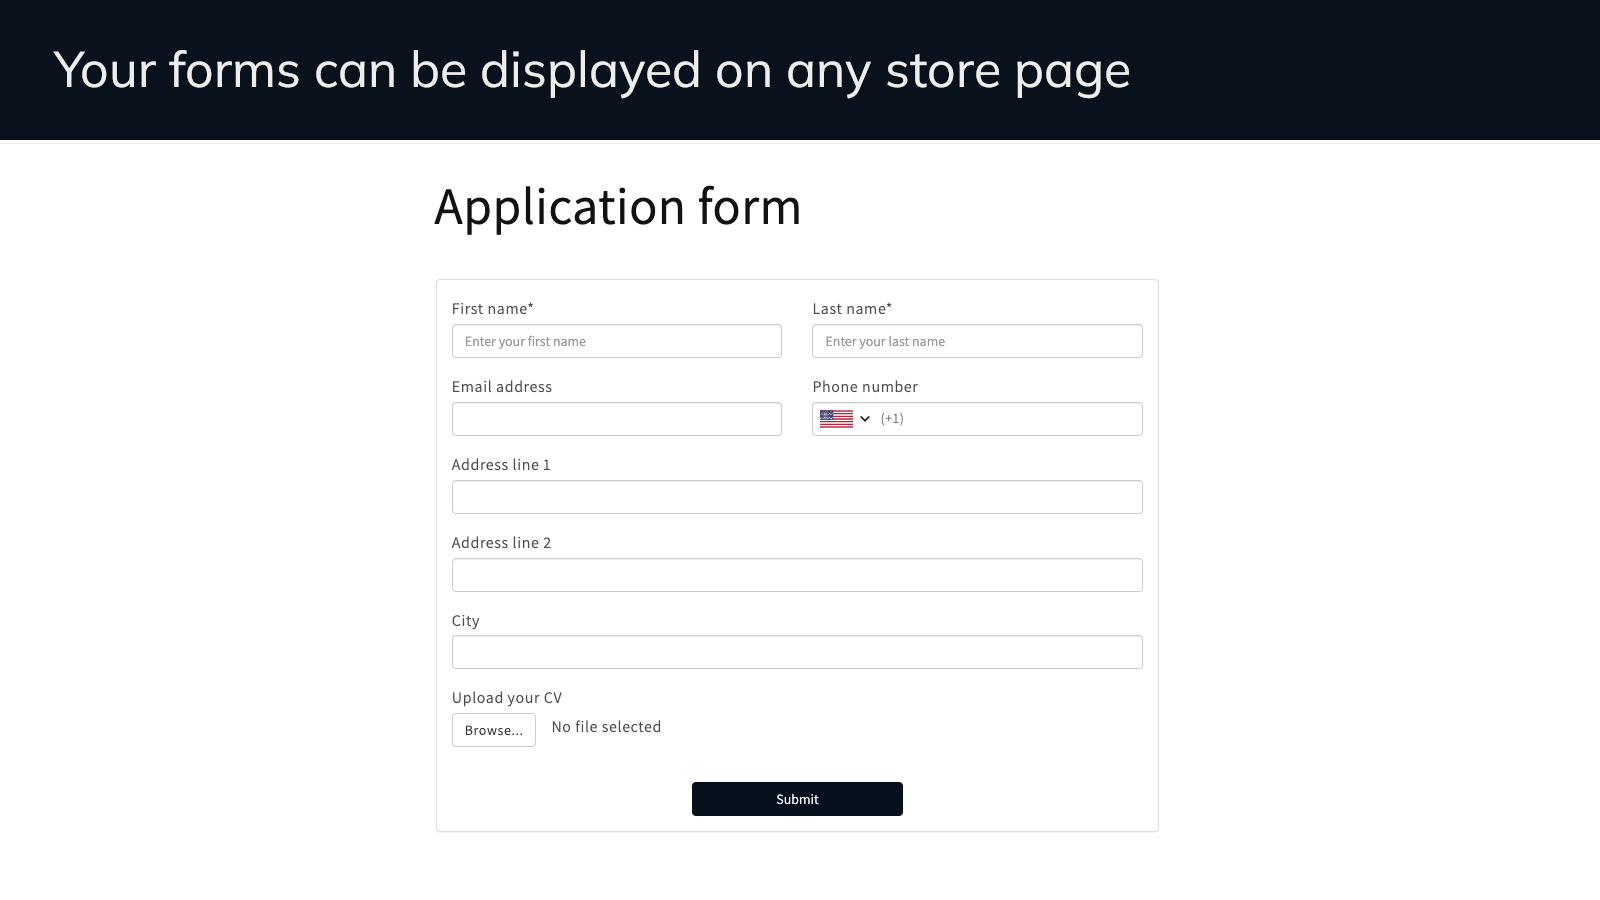 Your forms can be displayed on any store page